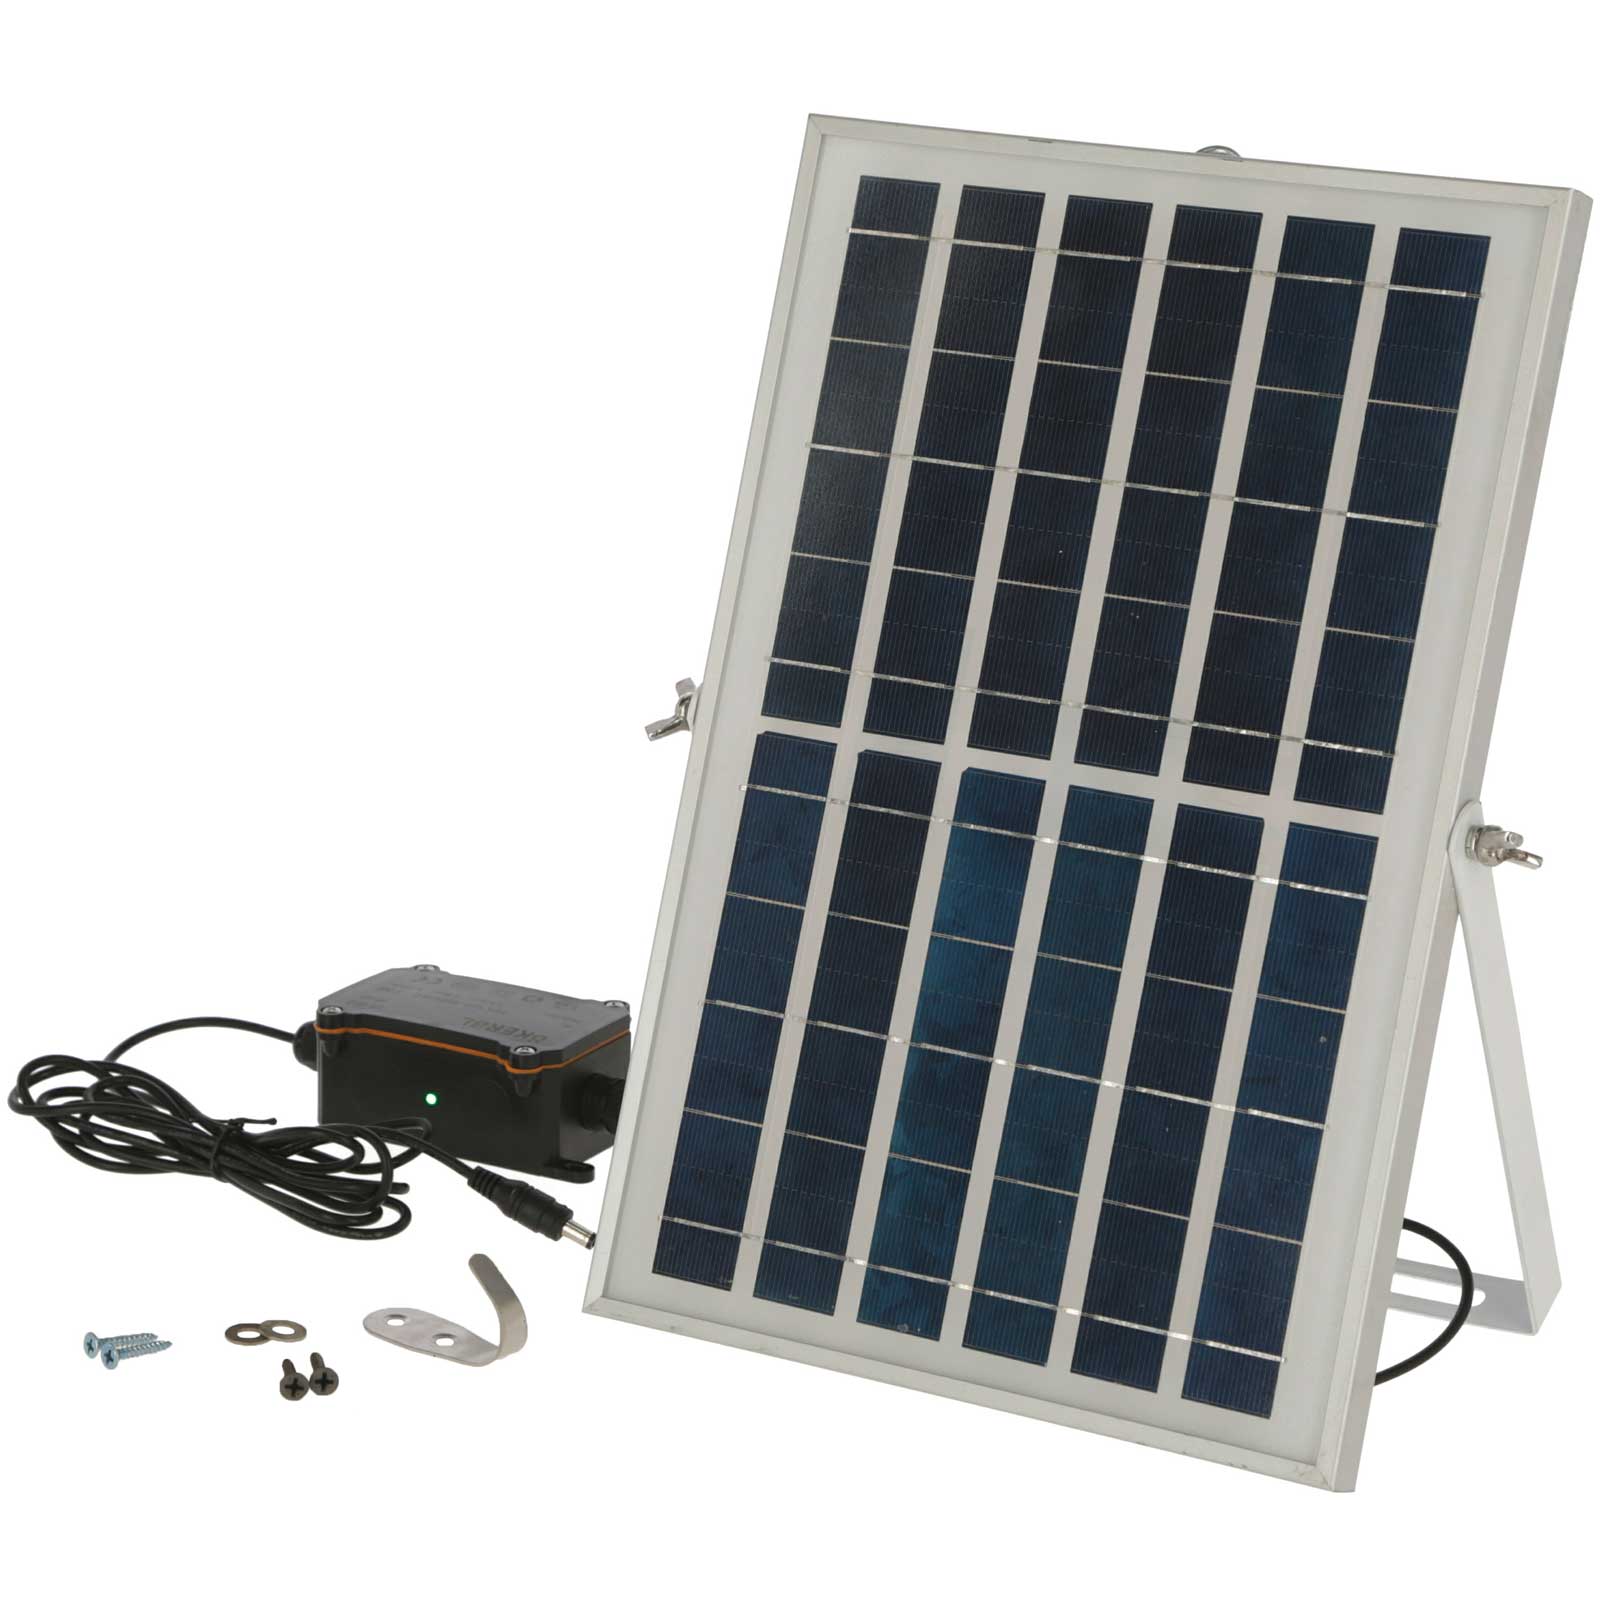 Kerbl Automatic Chicken Door Solar without slider